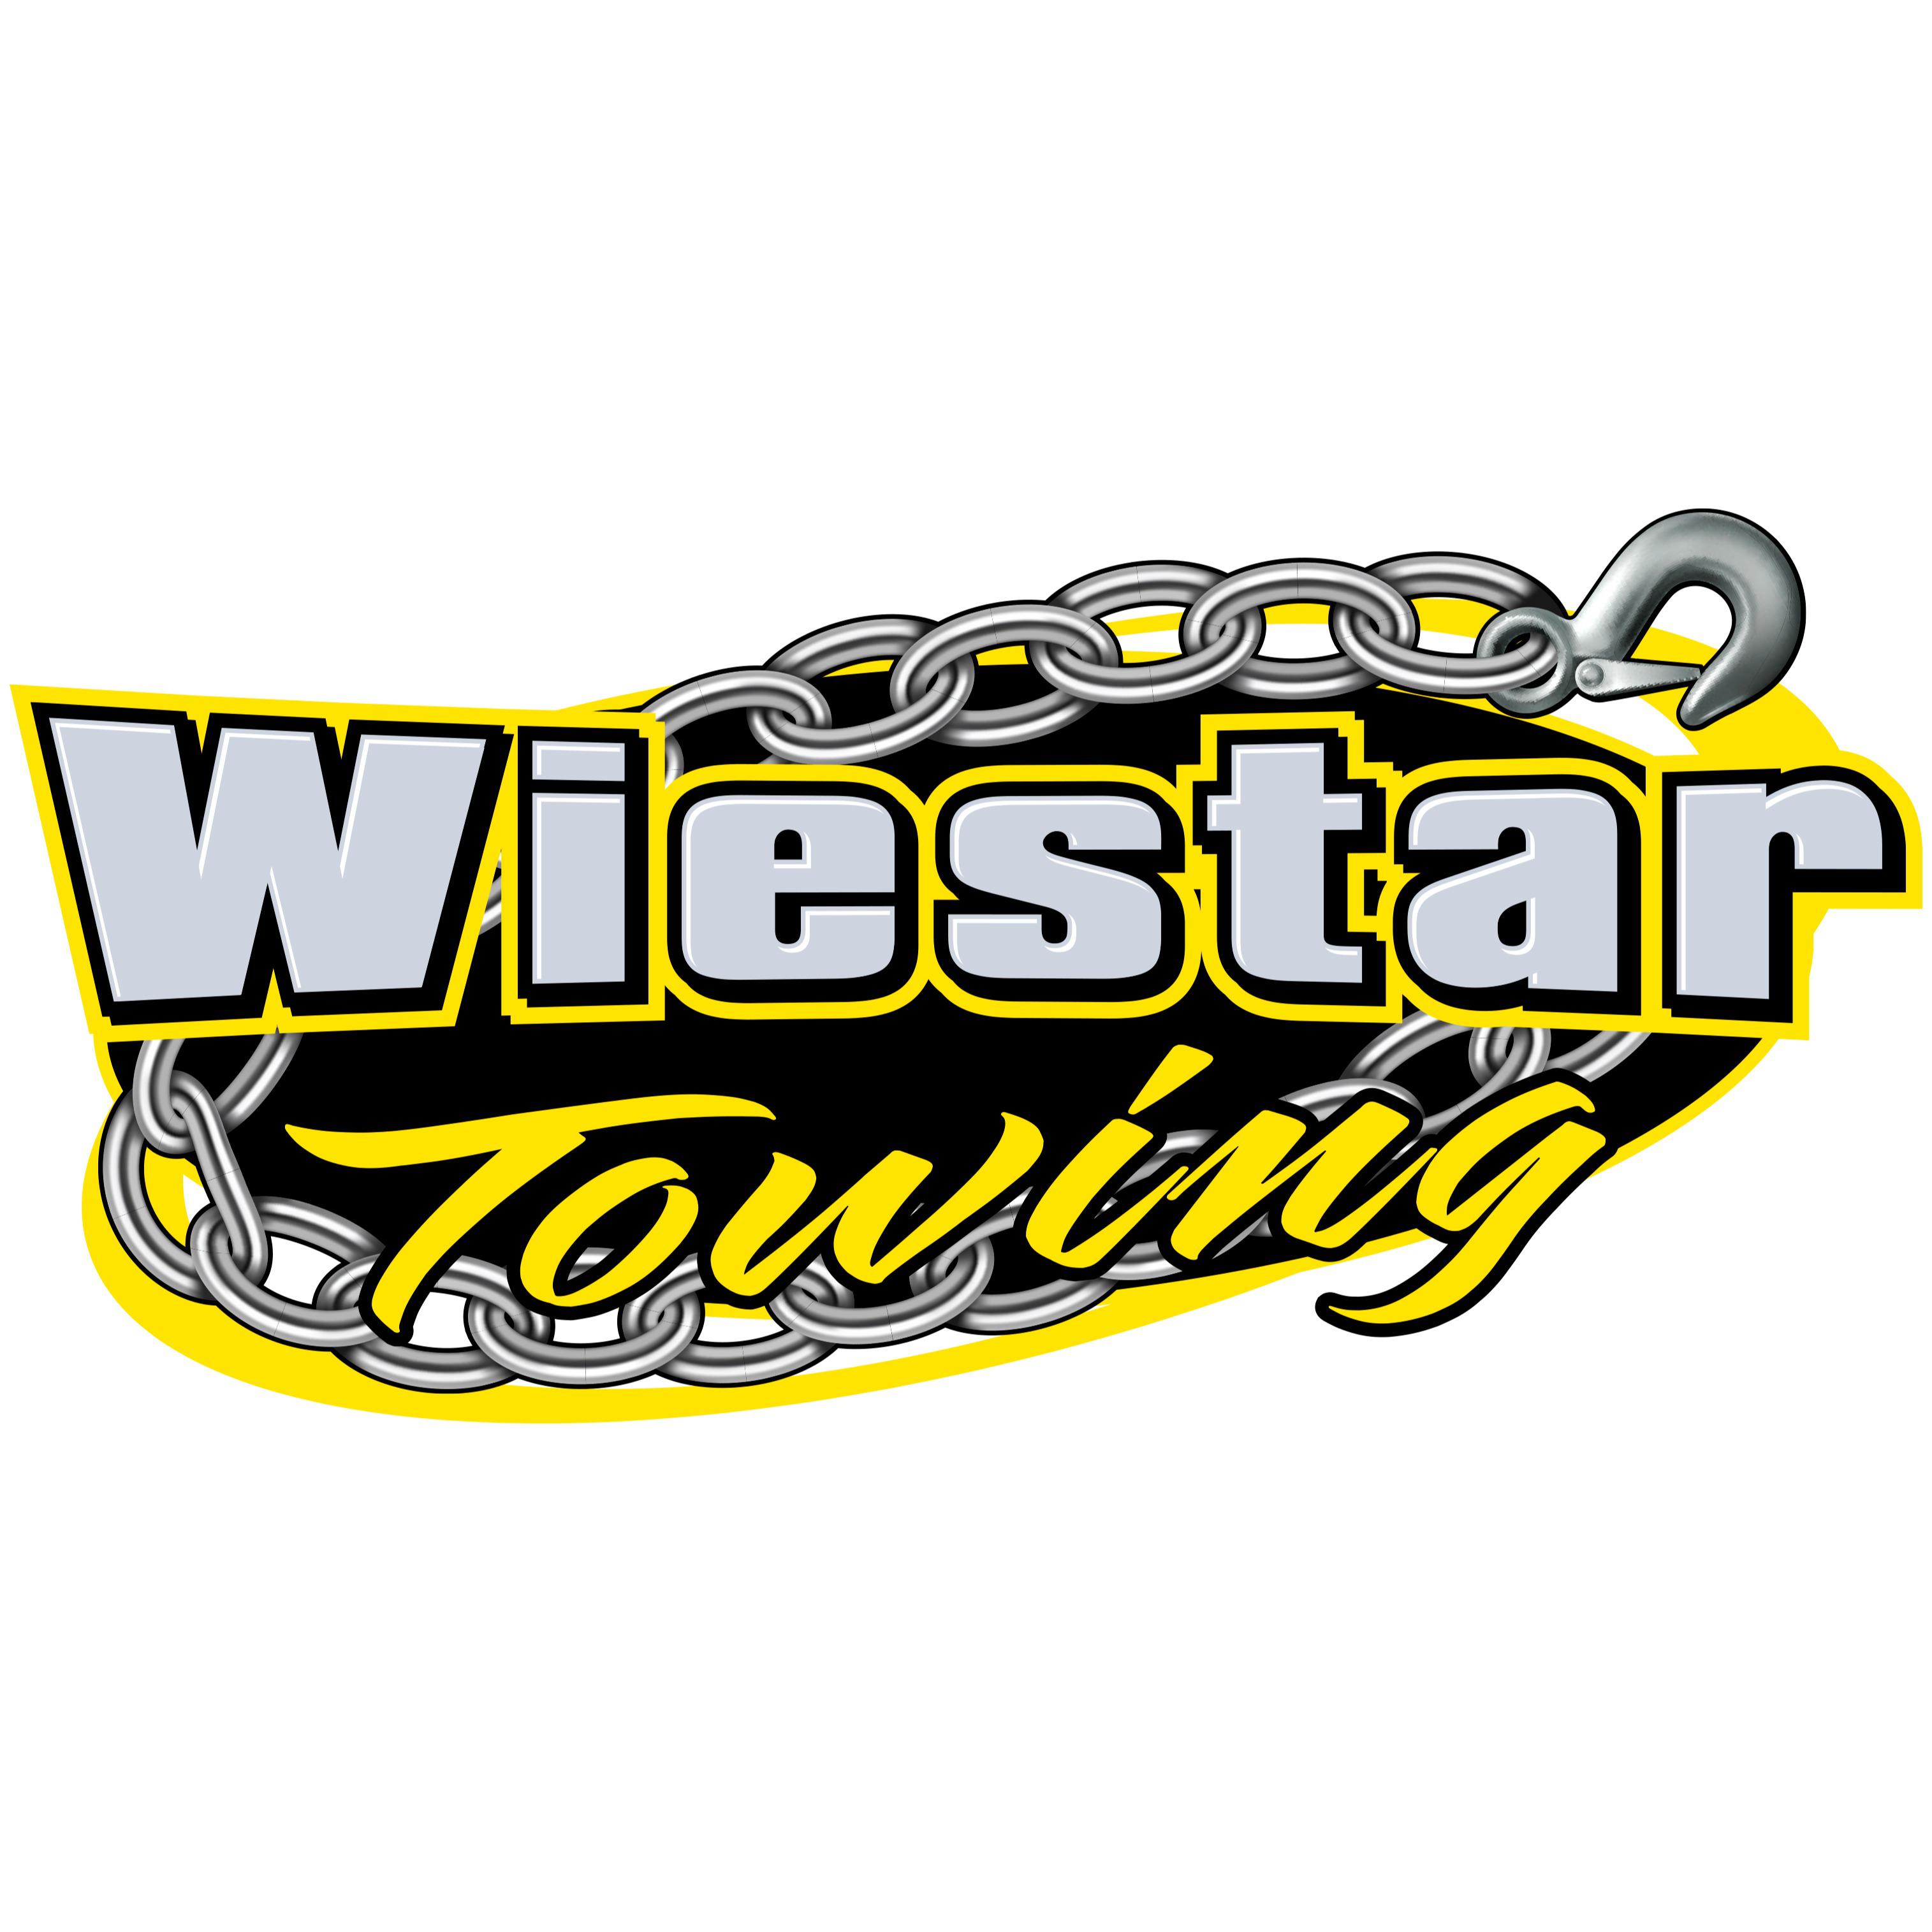 Wiestar Towing - Lincoln, NE 68507 - (402)476-9697 | ShowMeLocal.com